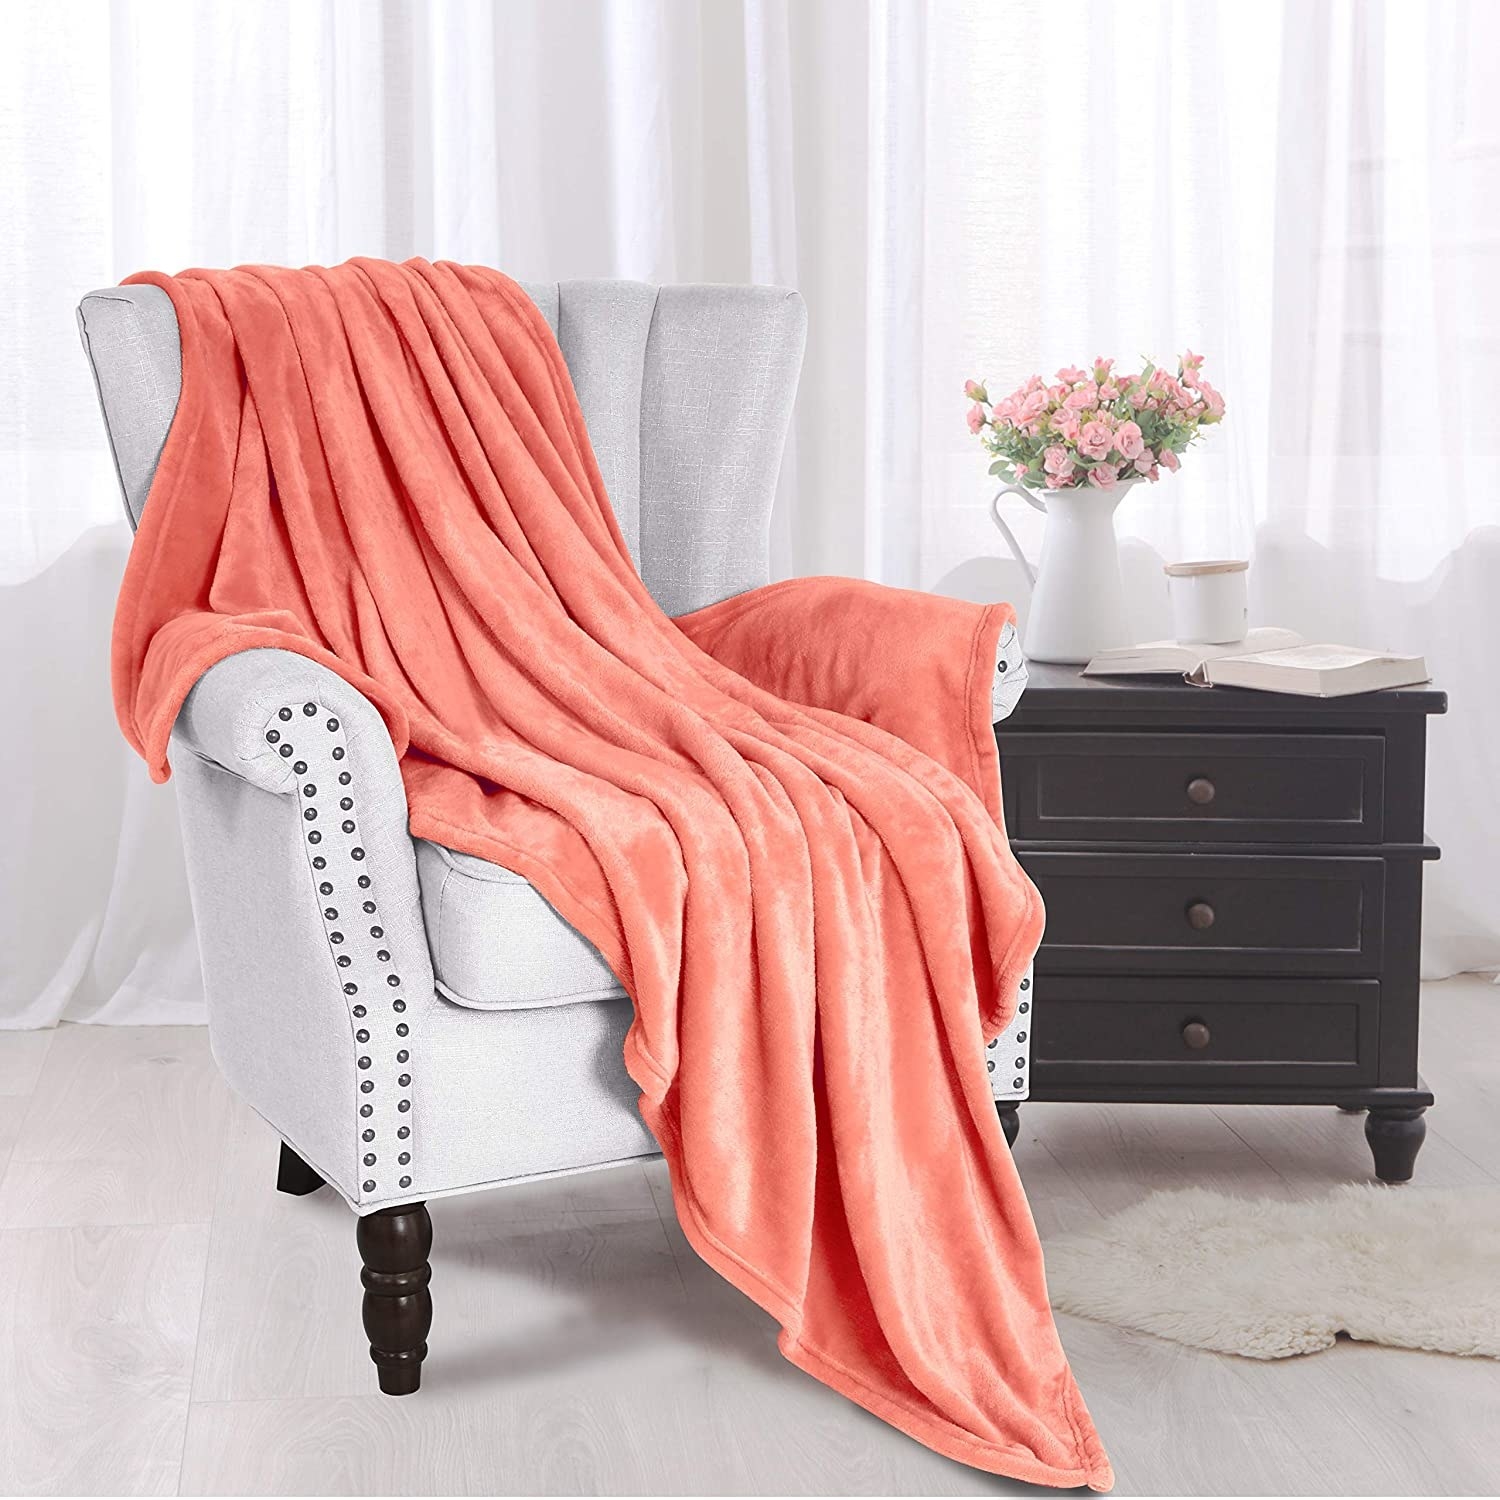 flannel fleece throw blanket in coral draped over a chair next to a side table